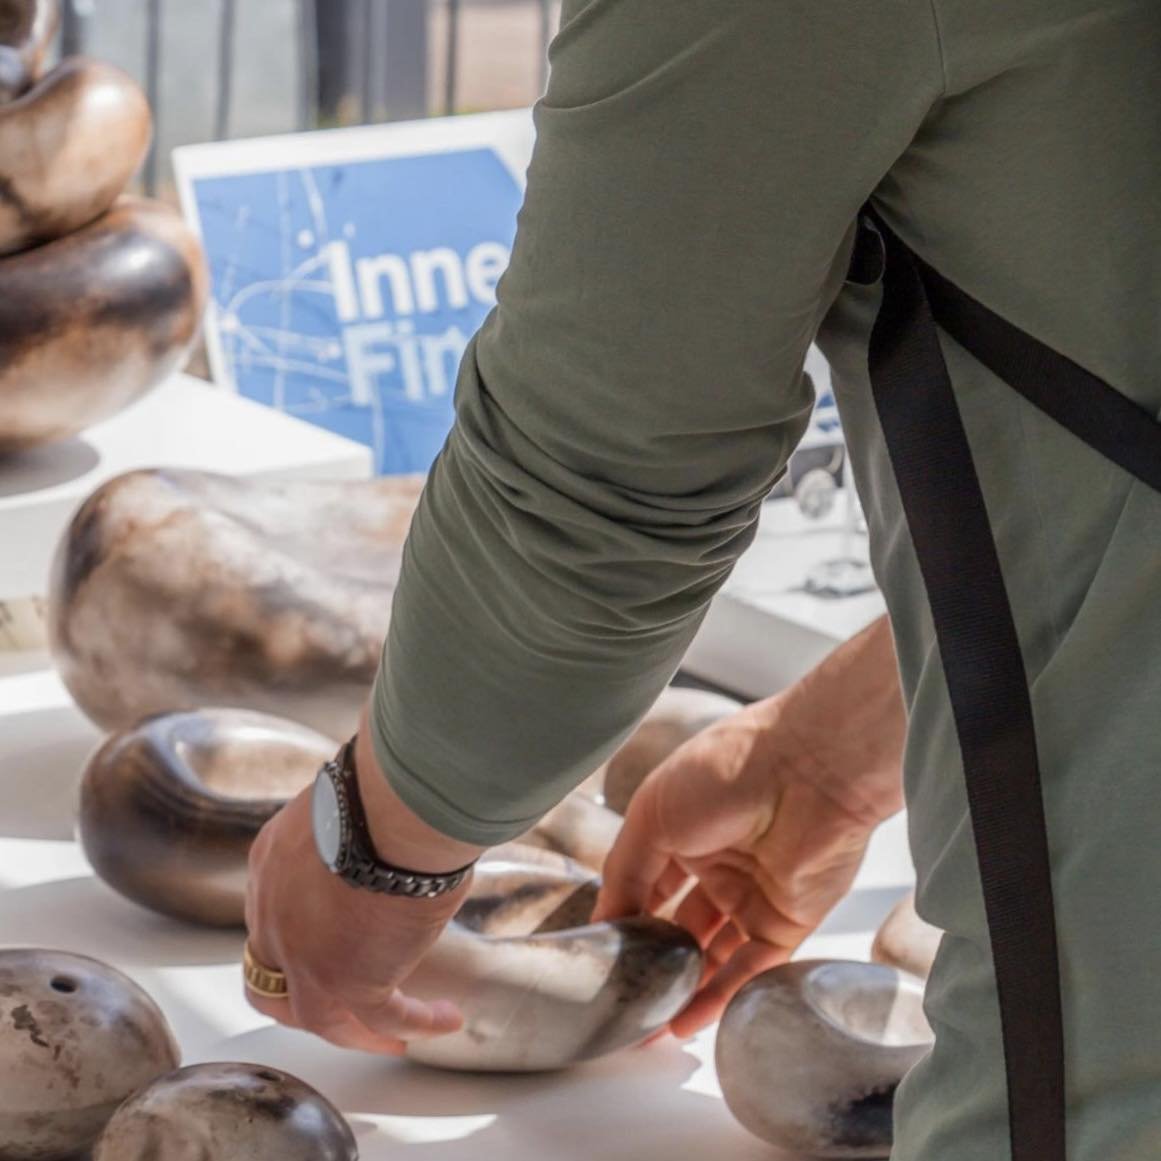 It&rsquo;s Ceramics In Charnwood this weekend. 80 potters selling their wares in Loughborough market place from 10-4. 

Isn&rsquo;t this a lovely photo shared by @ceramicsincharnwood  of someone enjoying my sculptures last year. 

  #ceramicsincharnw